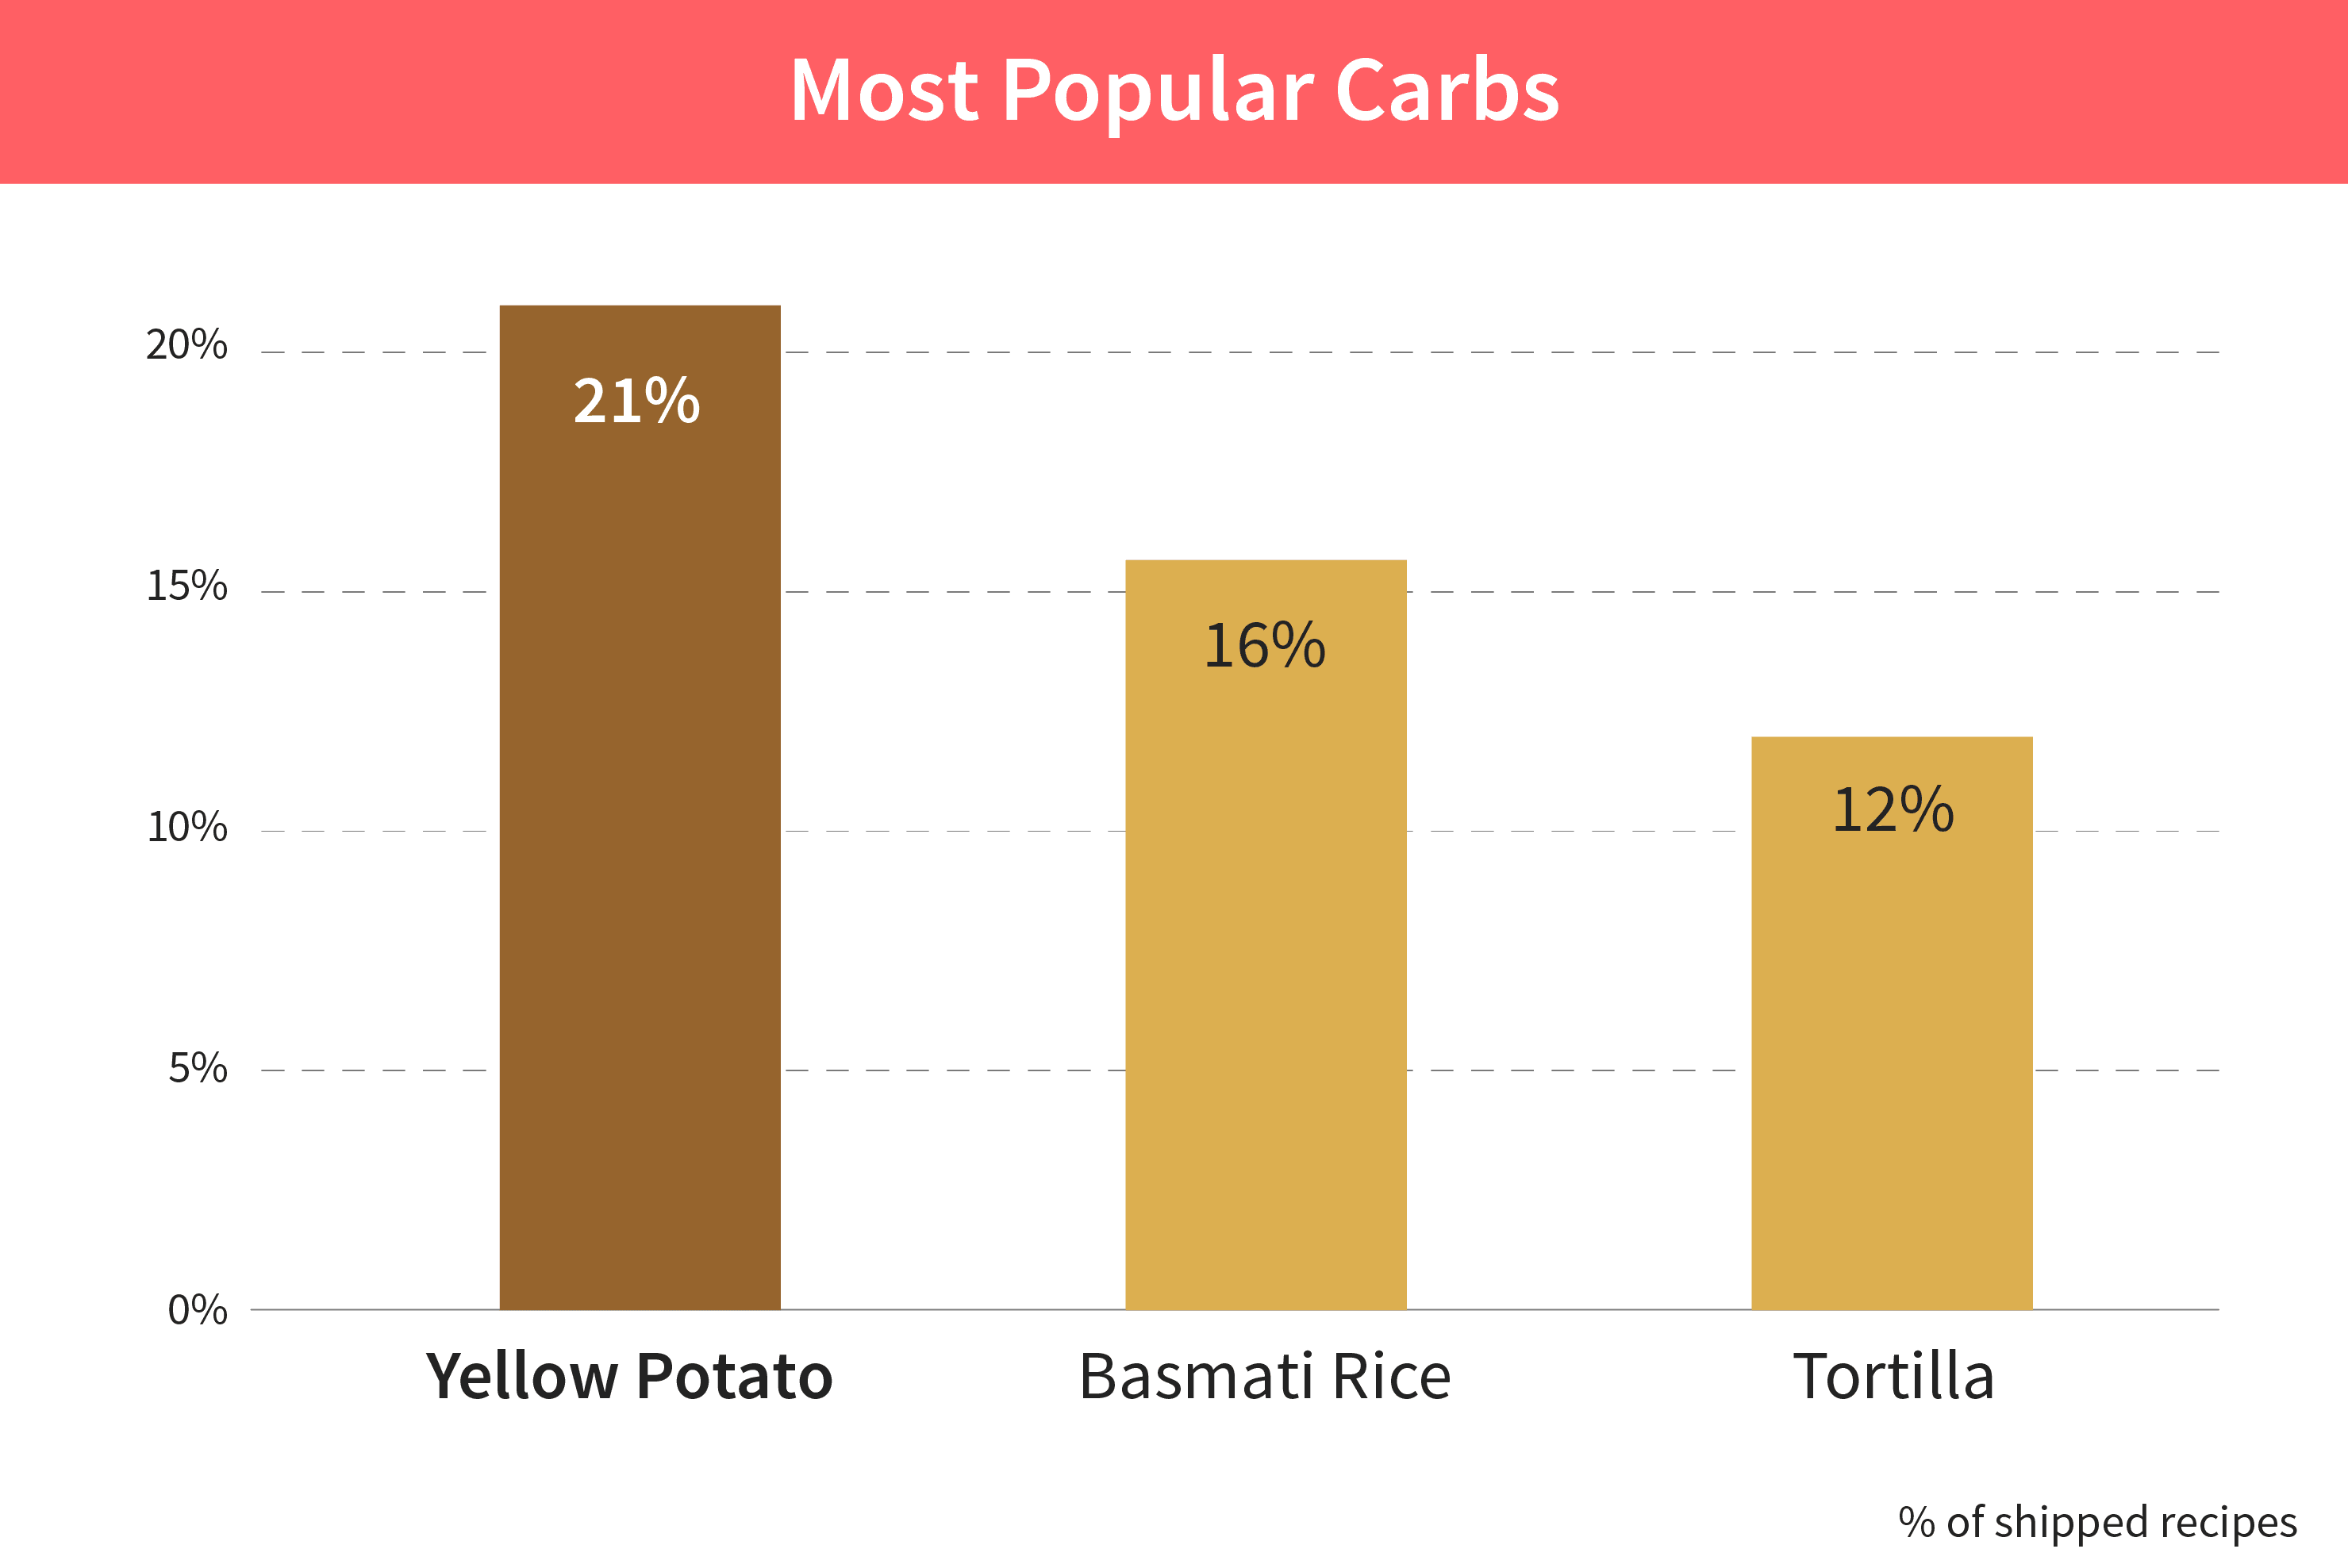 Yellow potatoes are a favourite